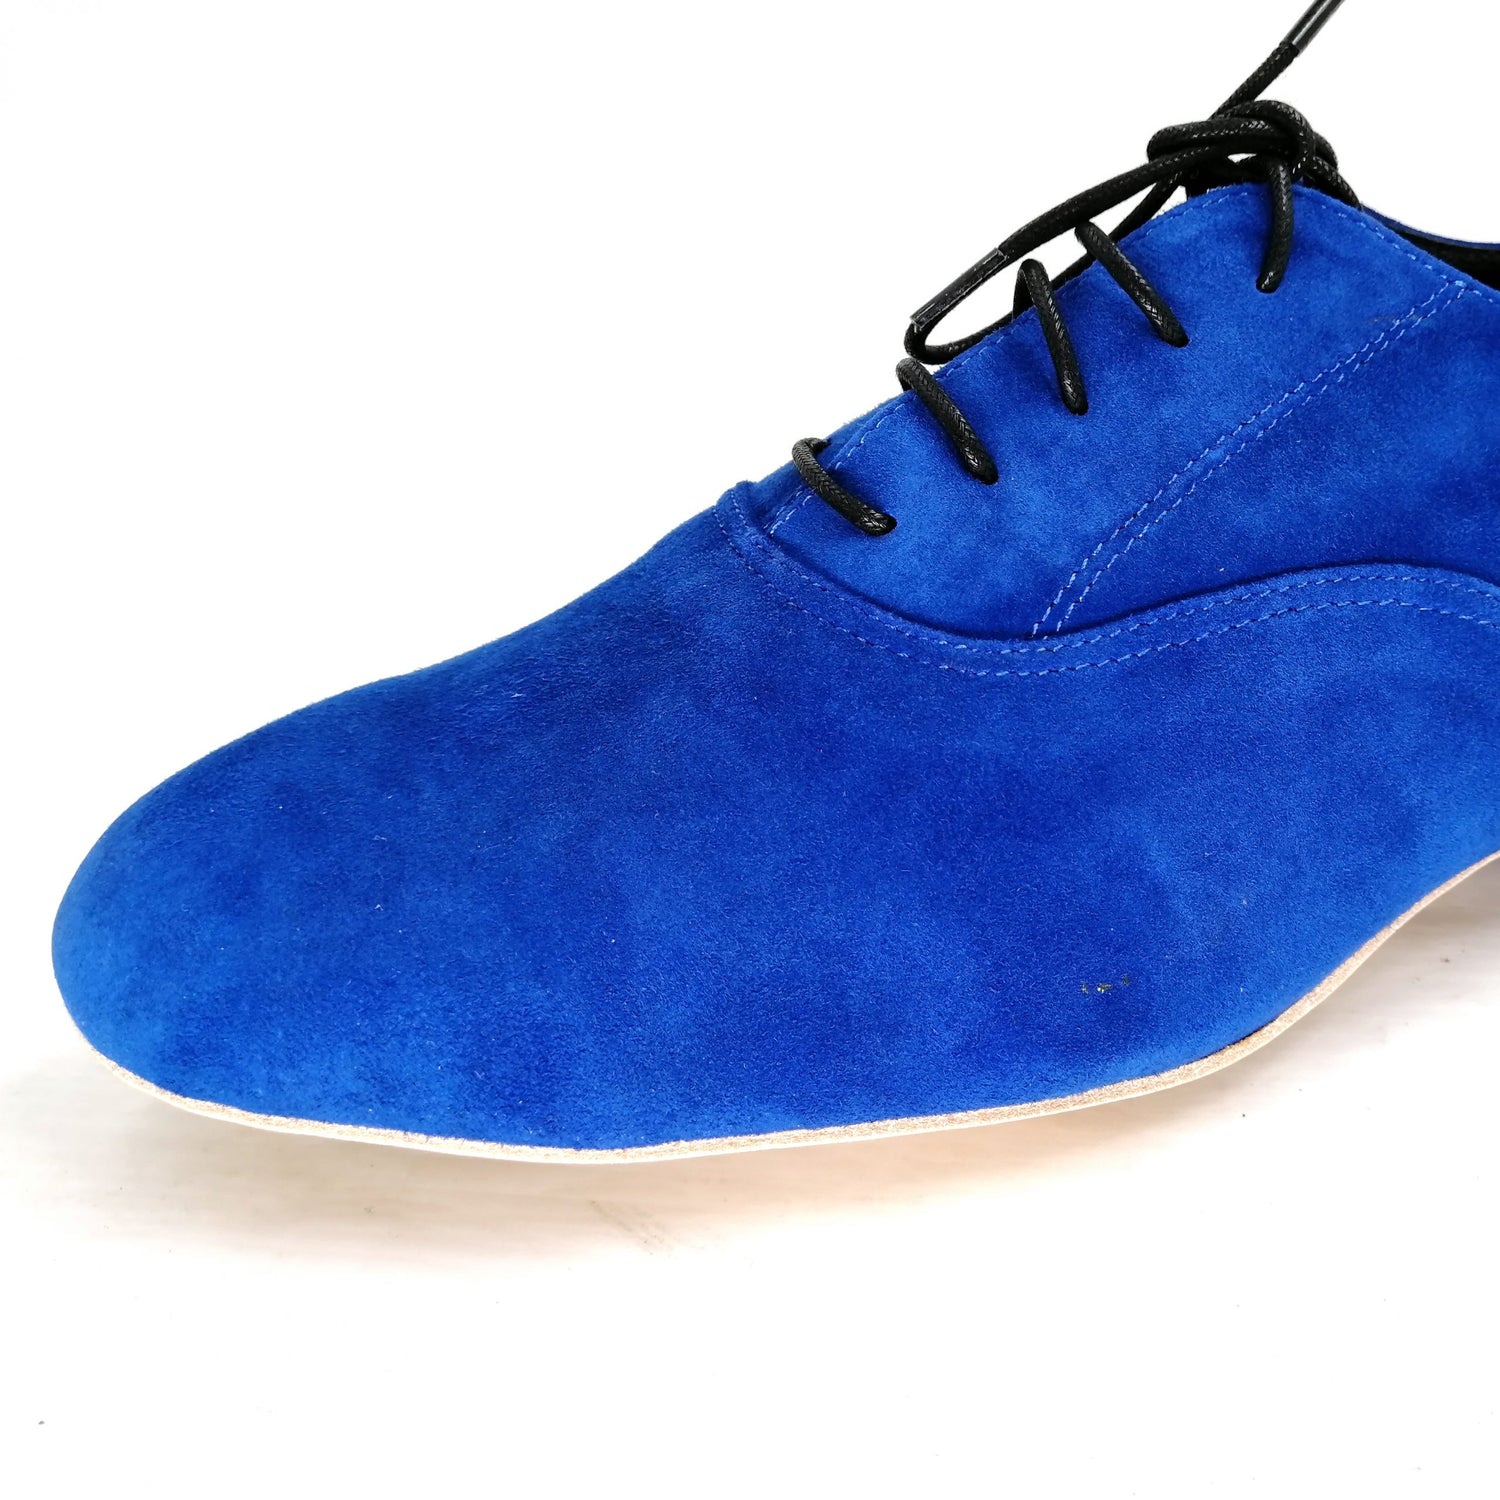 Men's Pro Dancer blue leather tango shoes with 1 inch heel PD1002A1